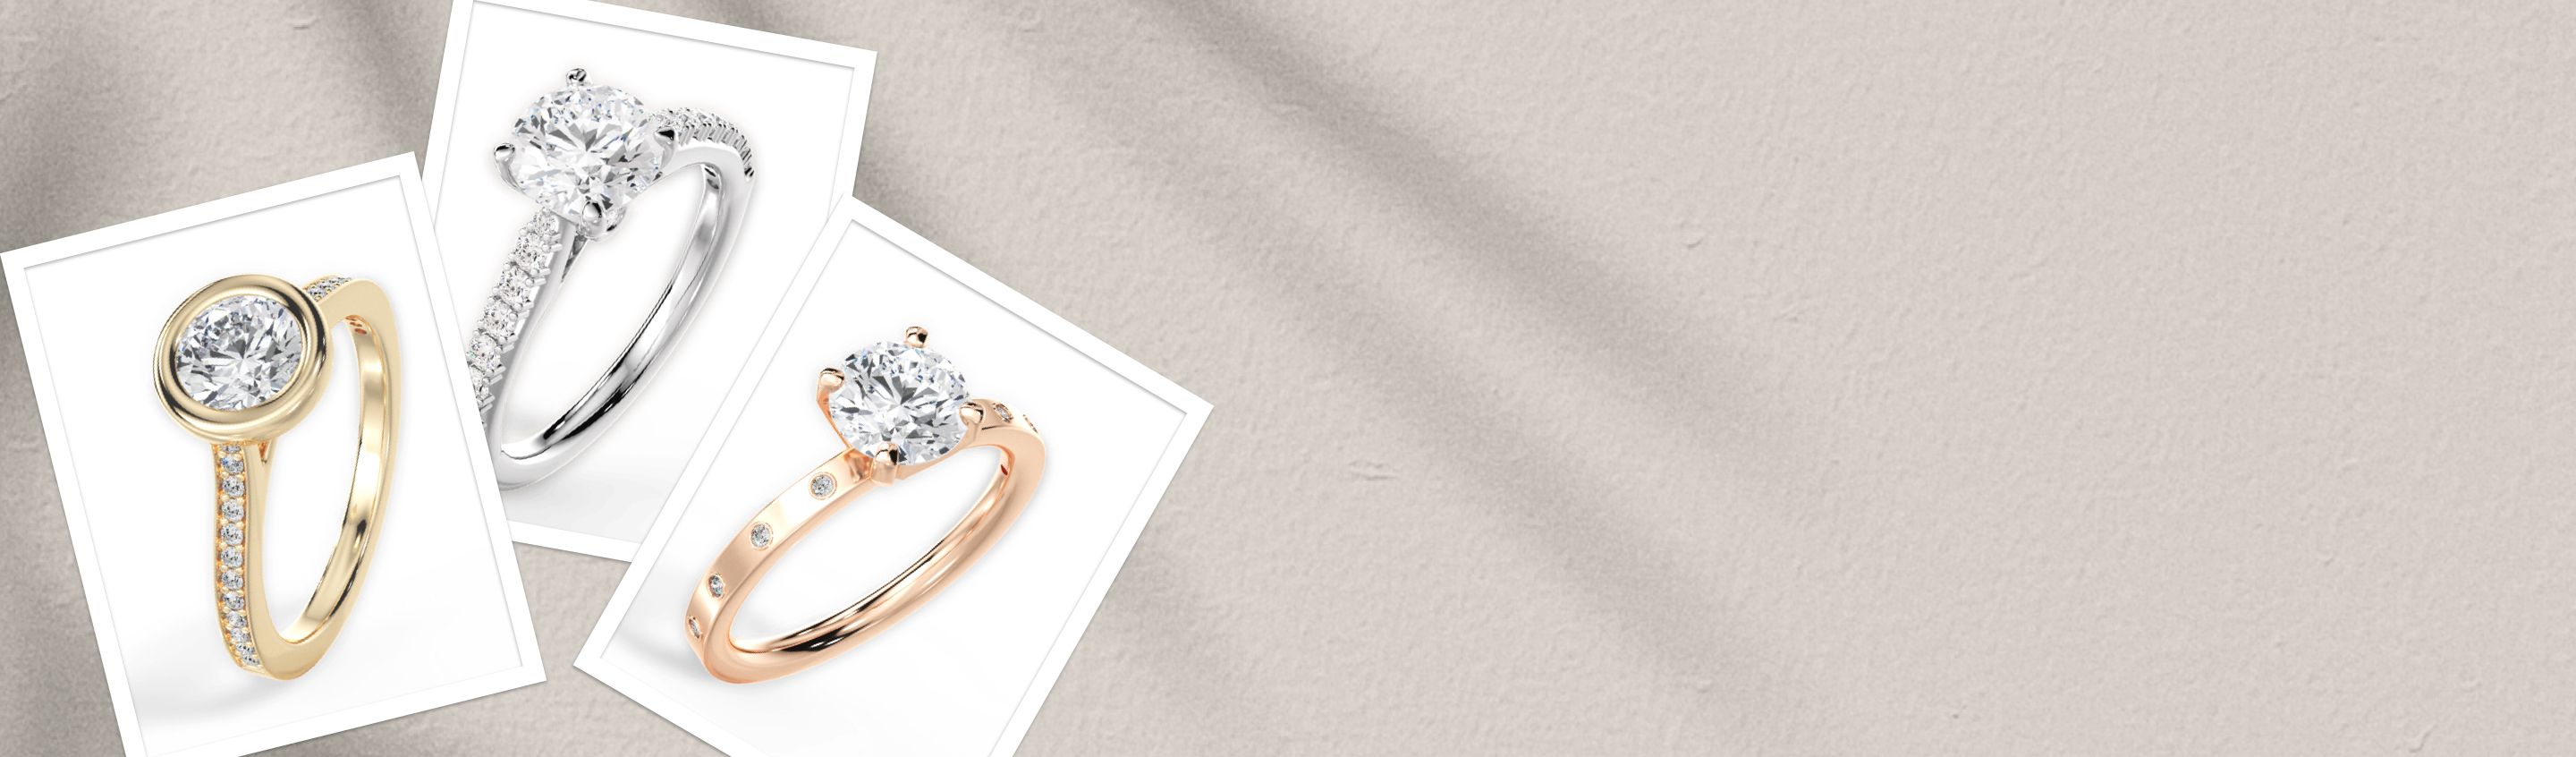 Aurora | Couture Engagement Ring In Birmingham, England, United Kingdom For  Sale (13656616)